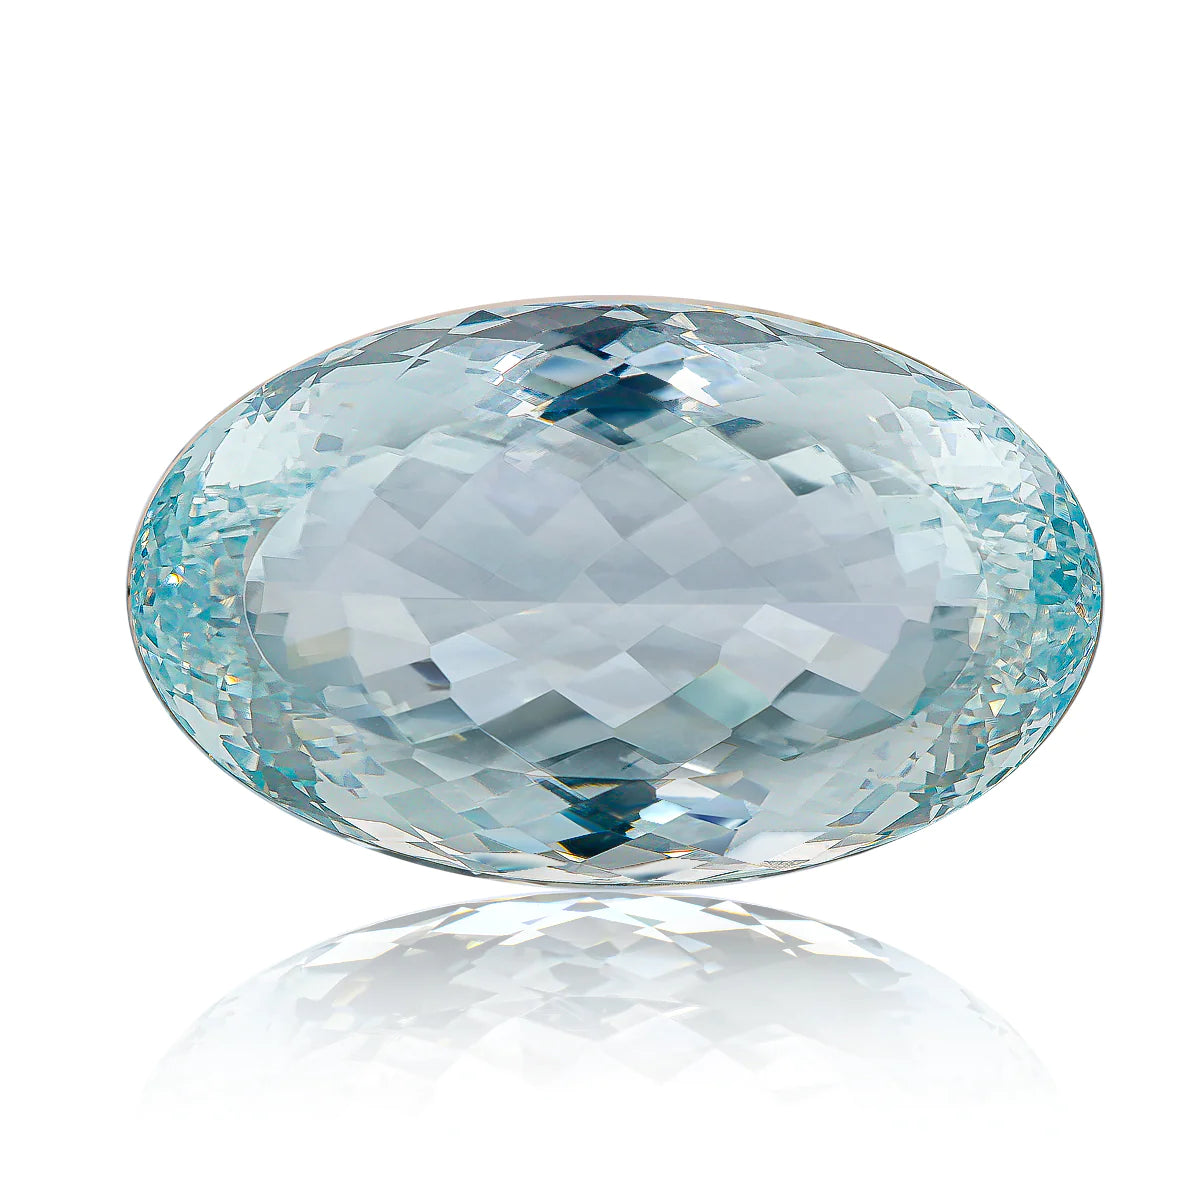 Introducing the stunningly beautiful Aquamarine Color White Topaz!